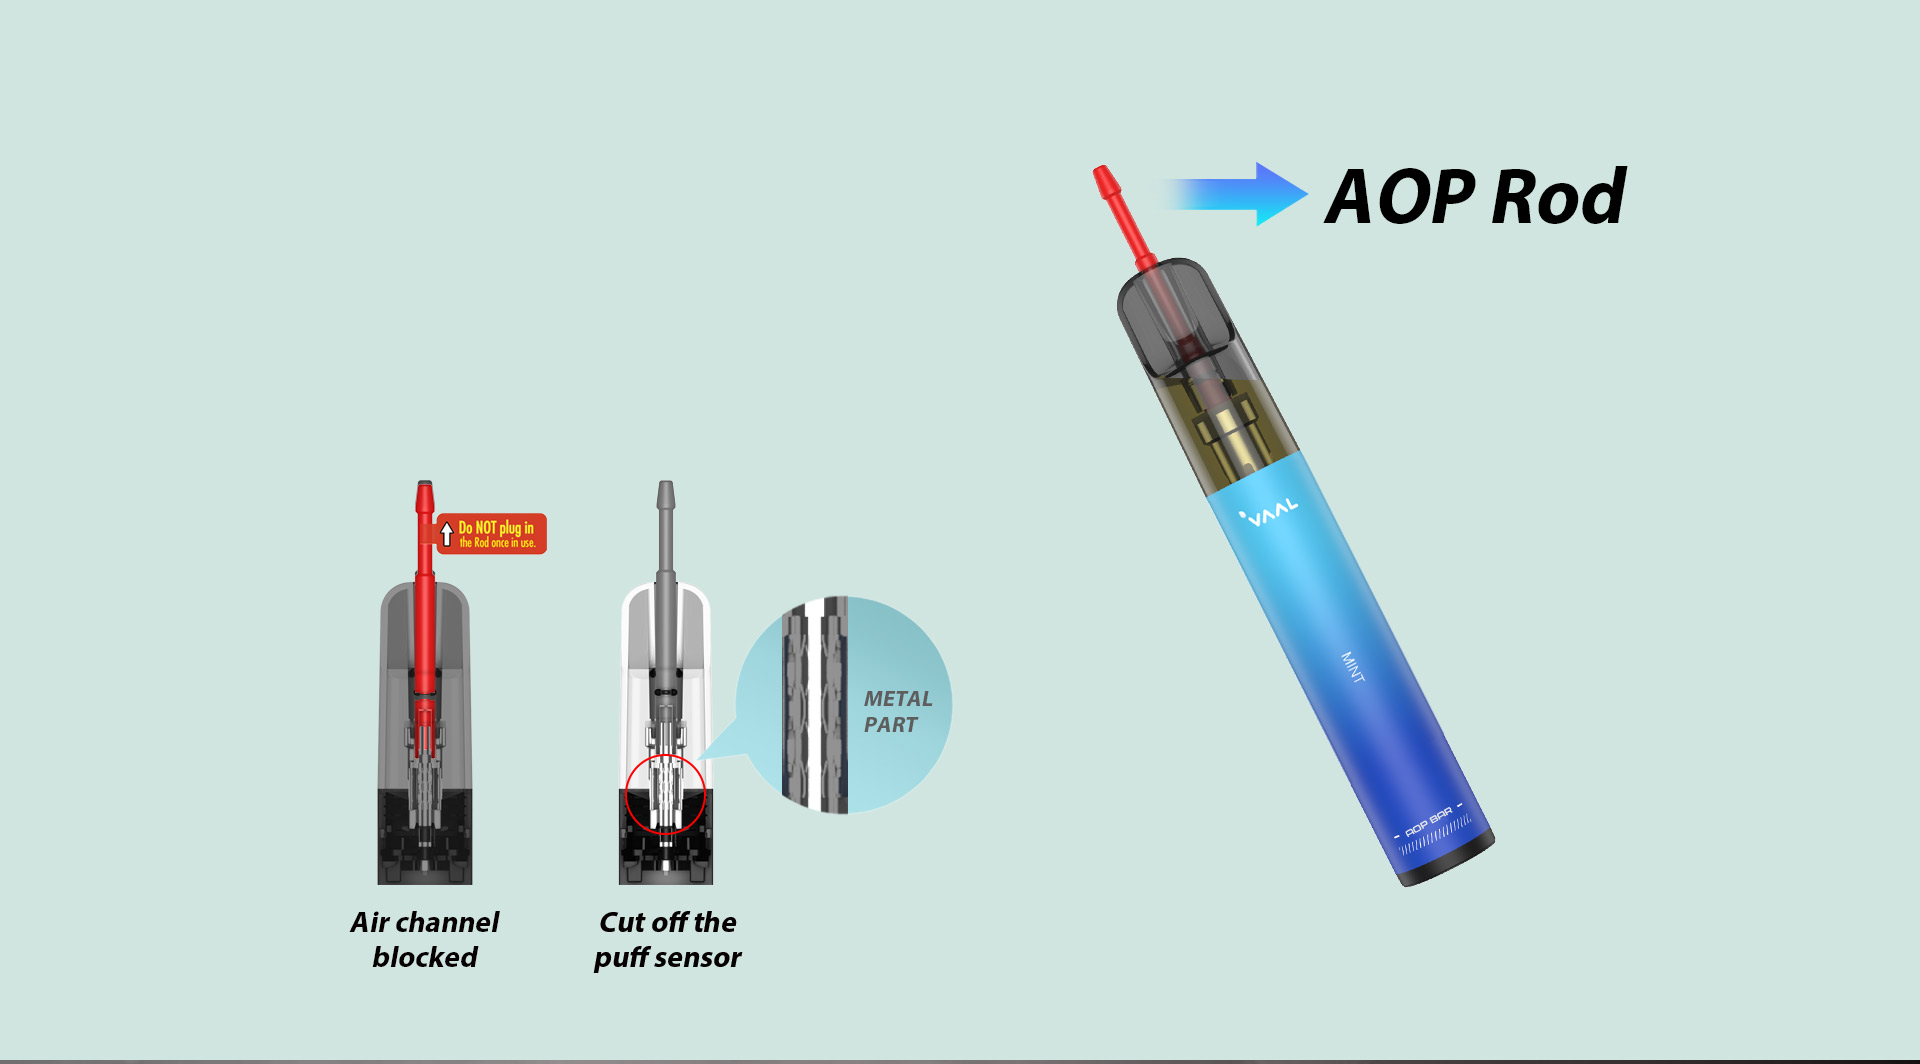 The VAAL AOP Bar uses AOP technology with a rod to block airflow and cut off puff sensor, providing a more comprehensive leak-proof solution.